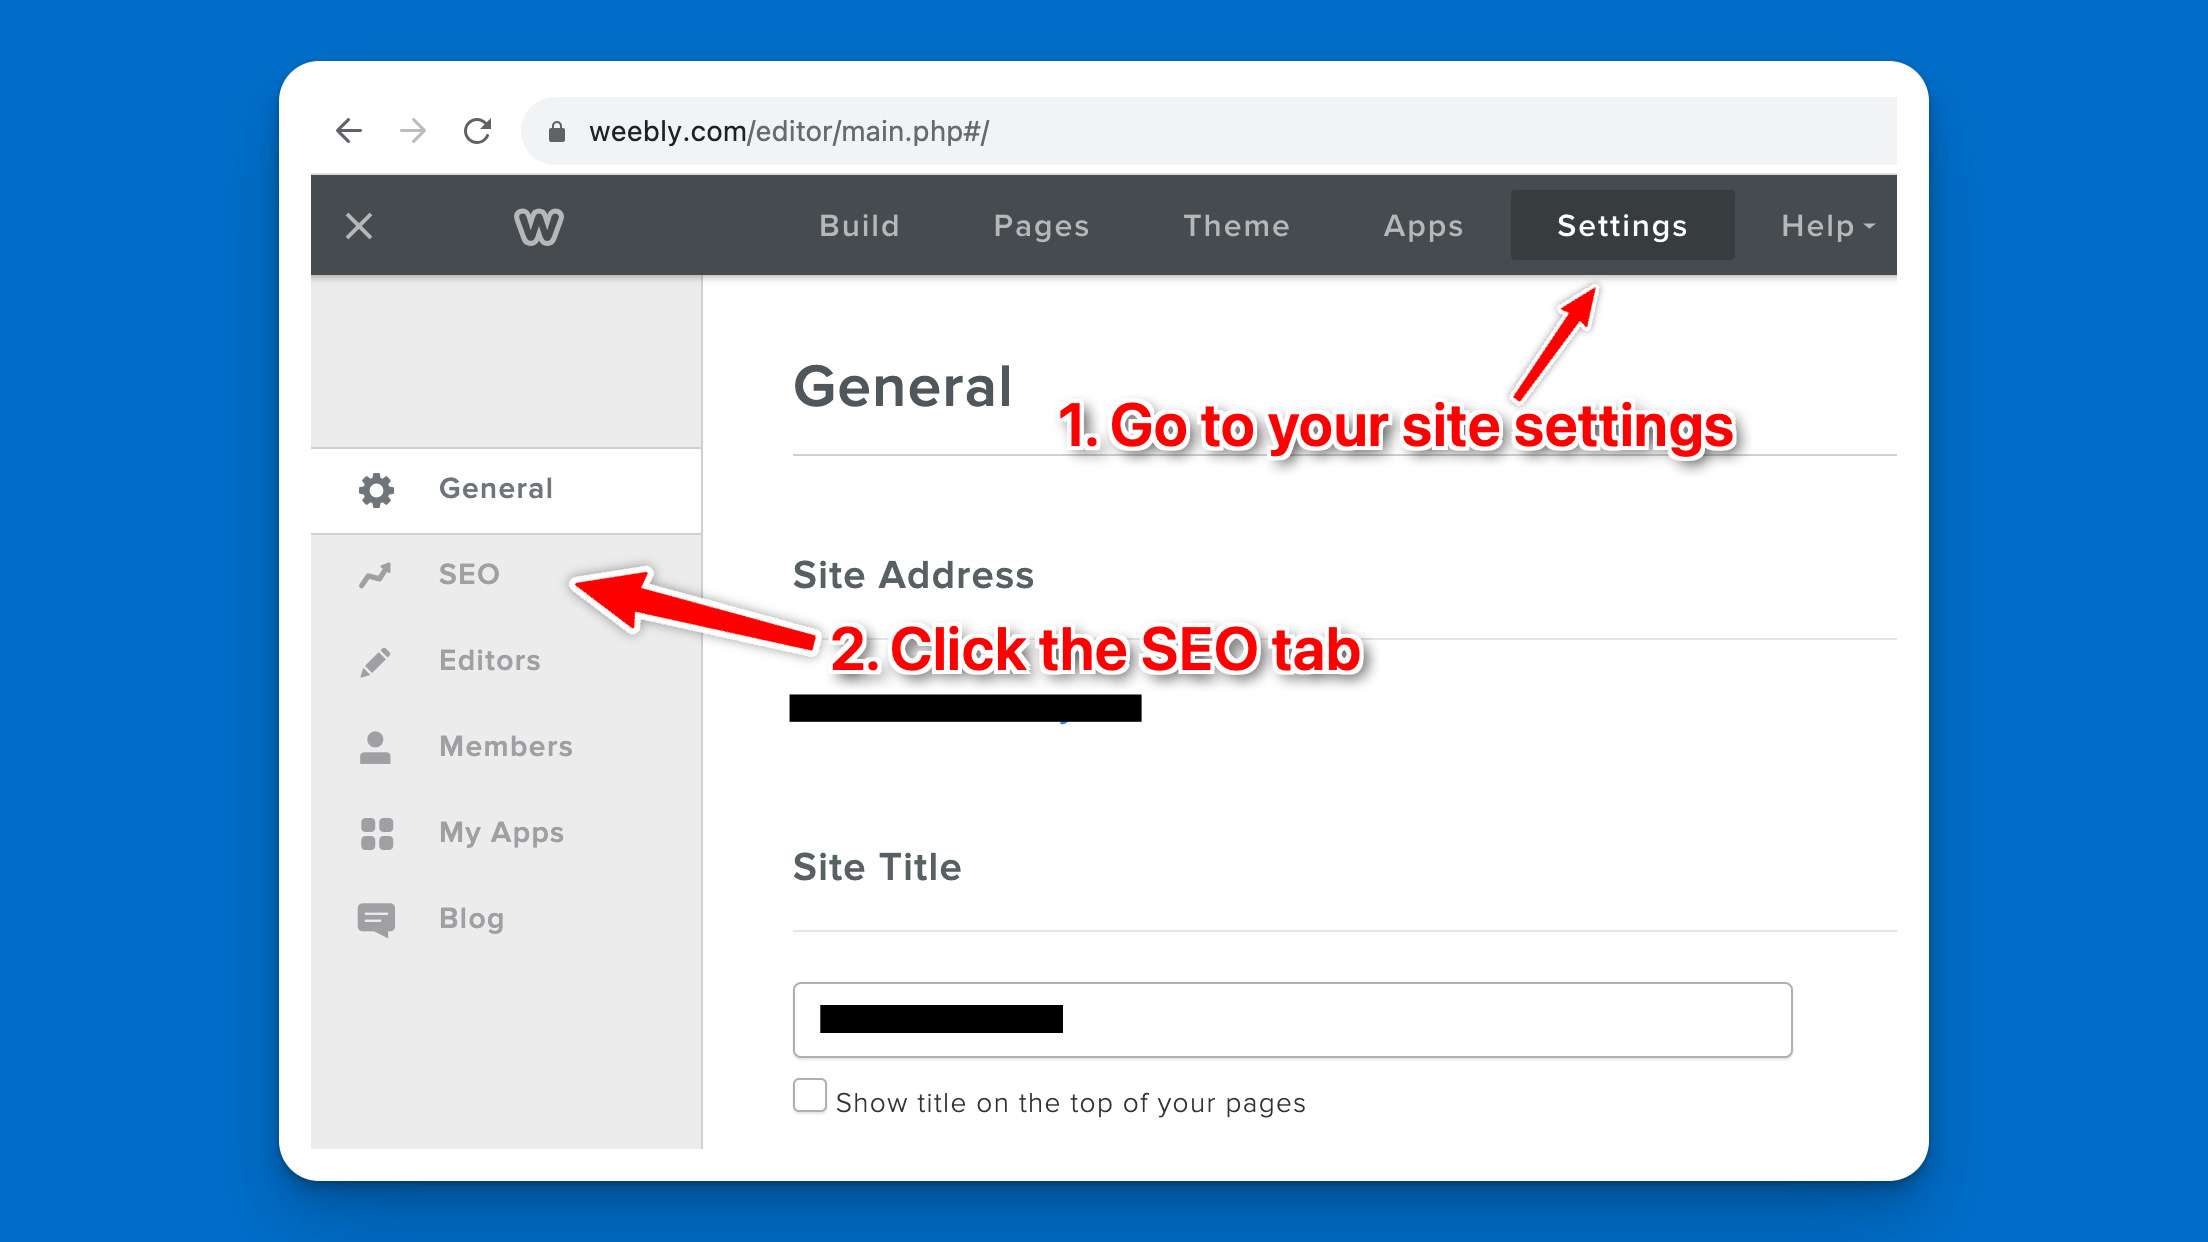 Navigating to the SEO tab in Weebly